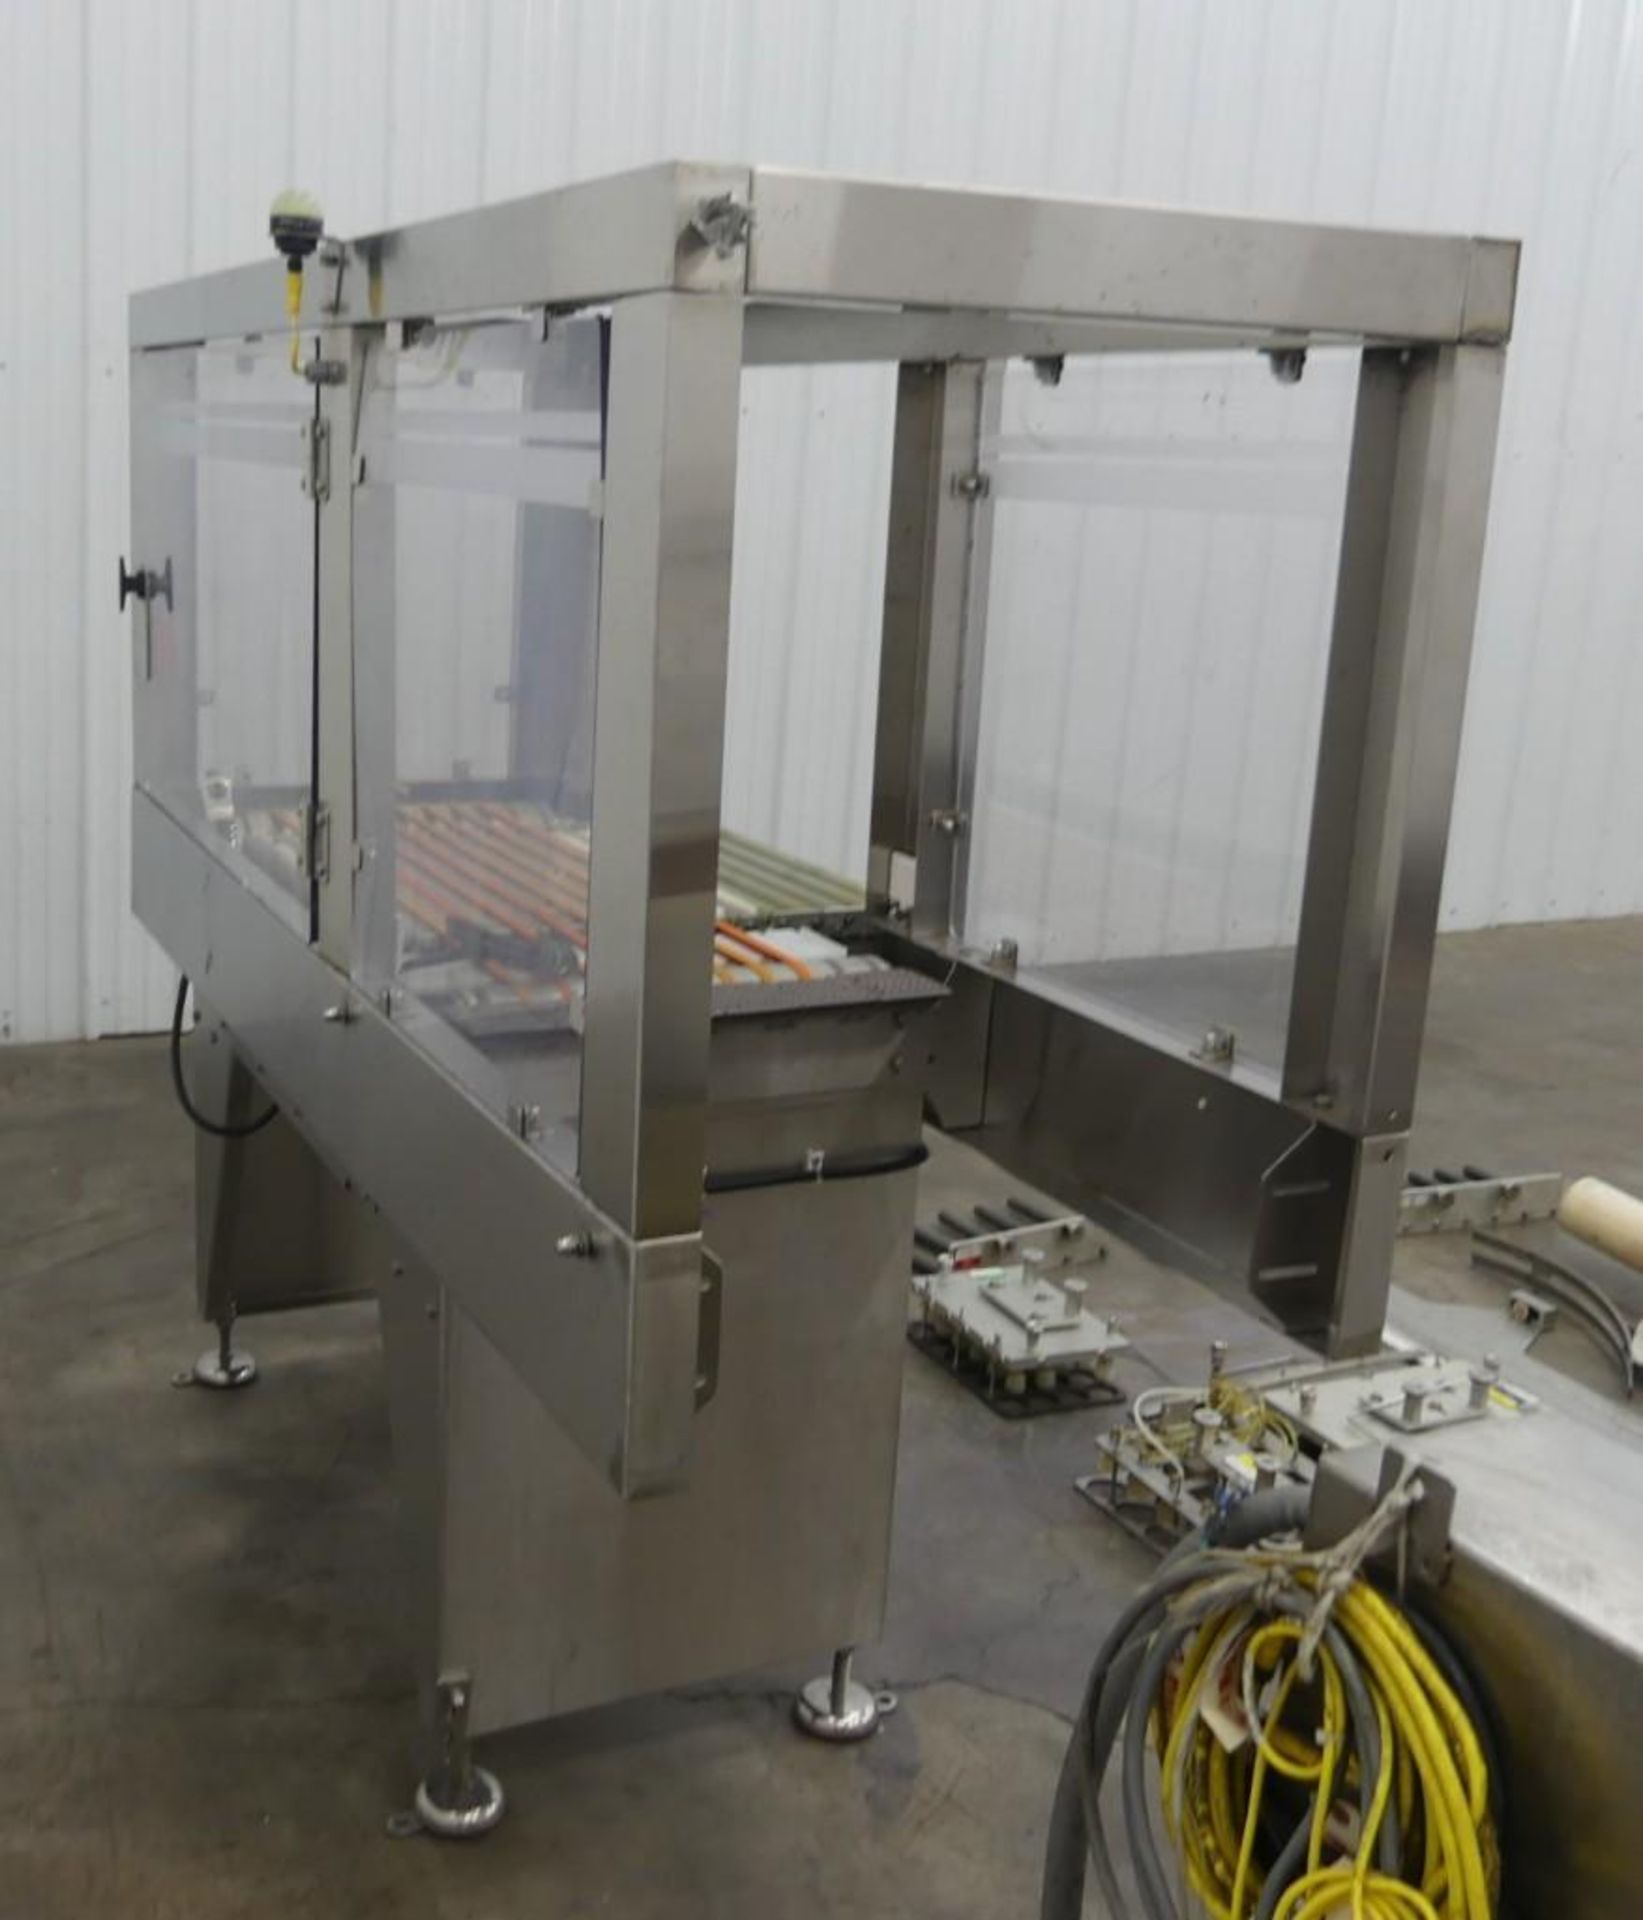 Arpac Delkor Spot-Pak 112-SS-24 Automatic Stainless Steel Shrink Bundler - Image 93 of 101